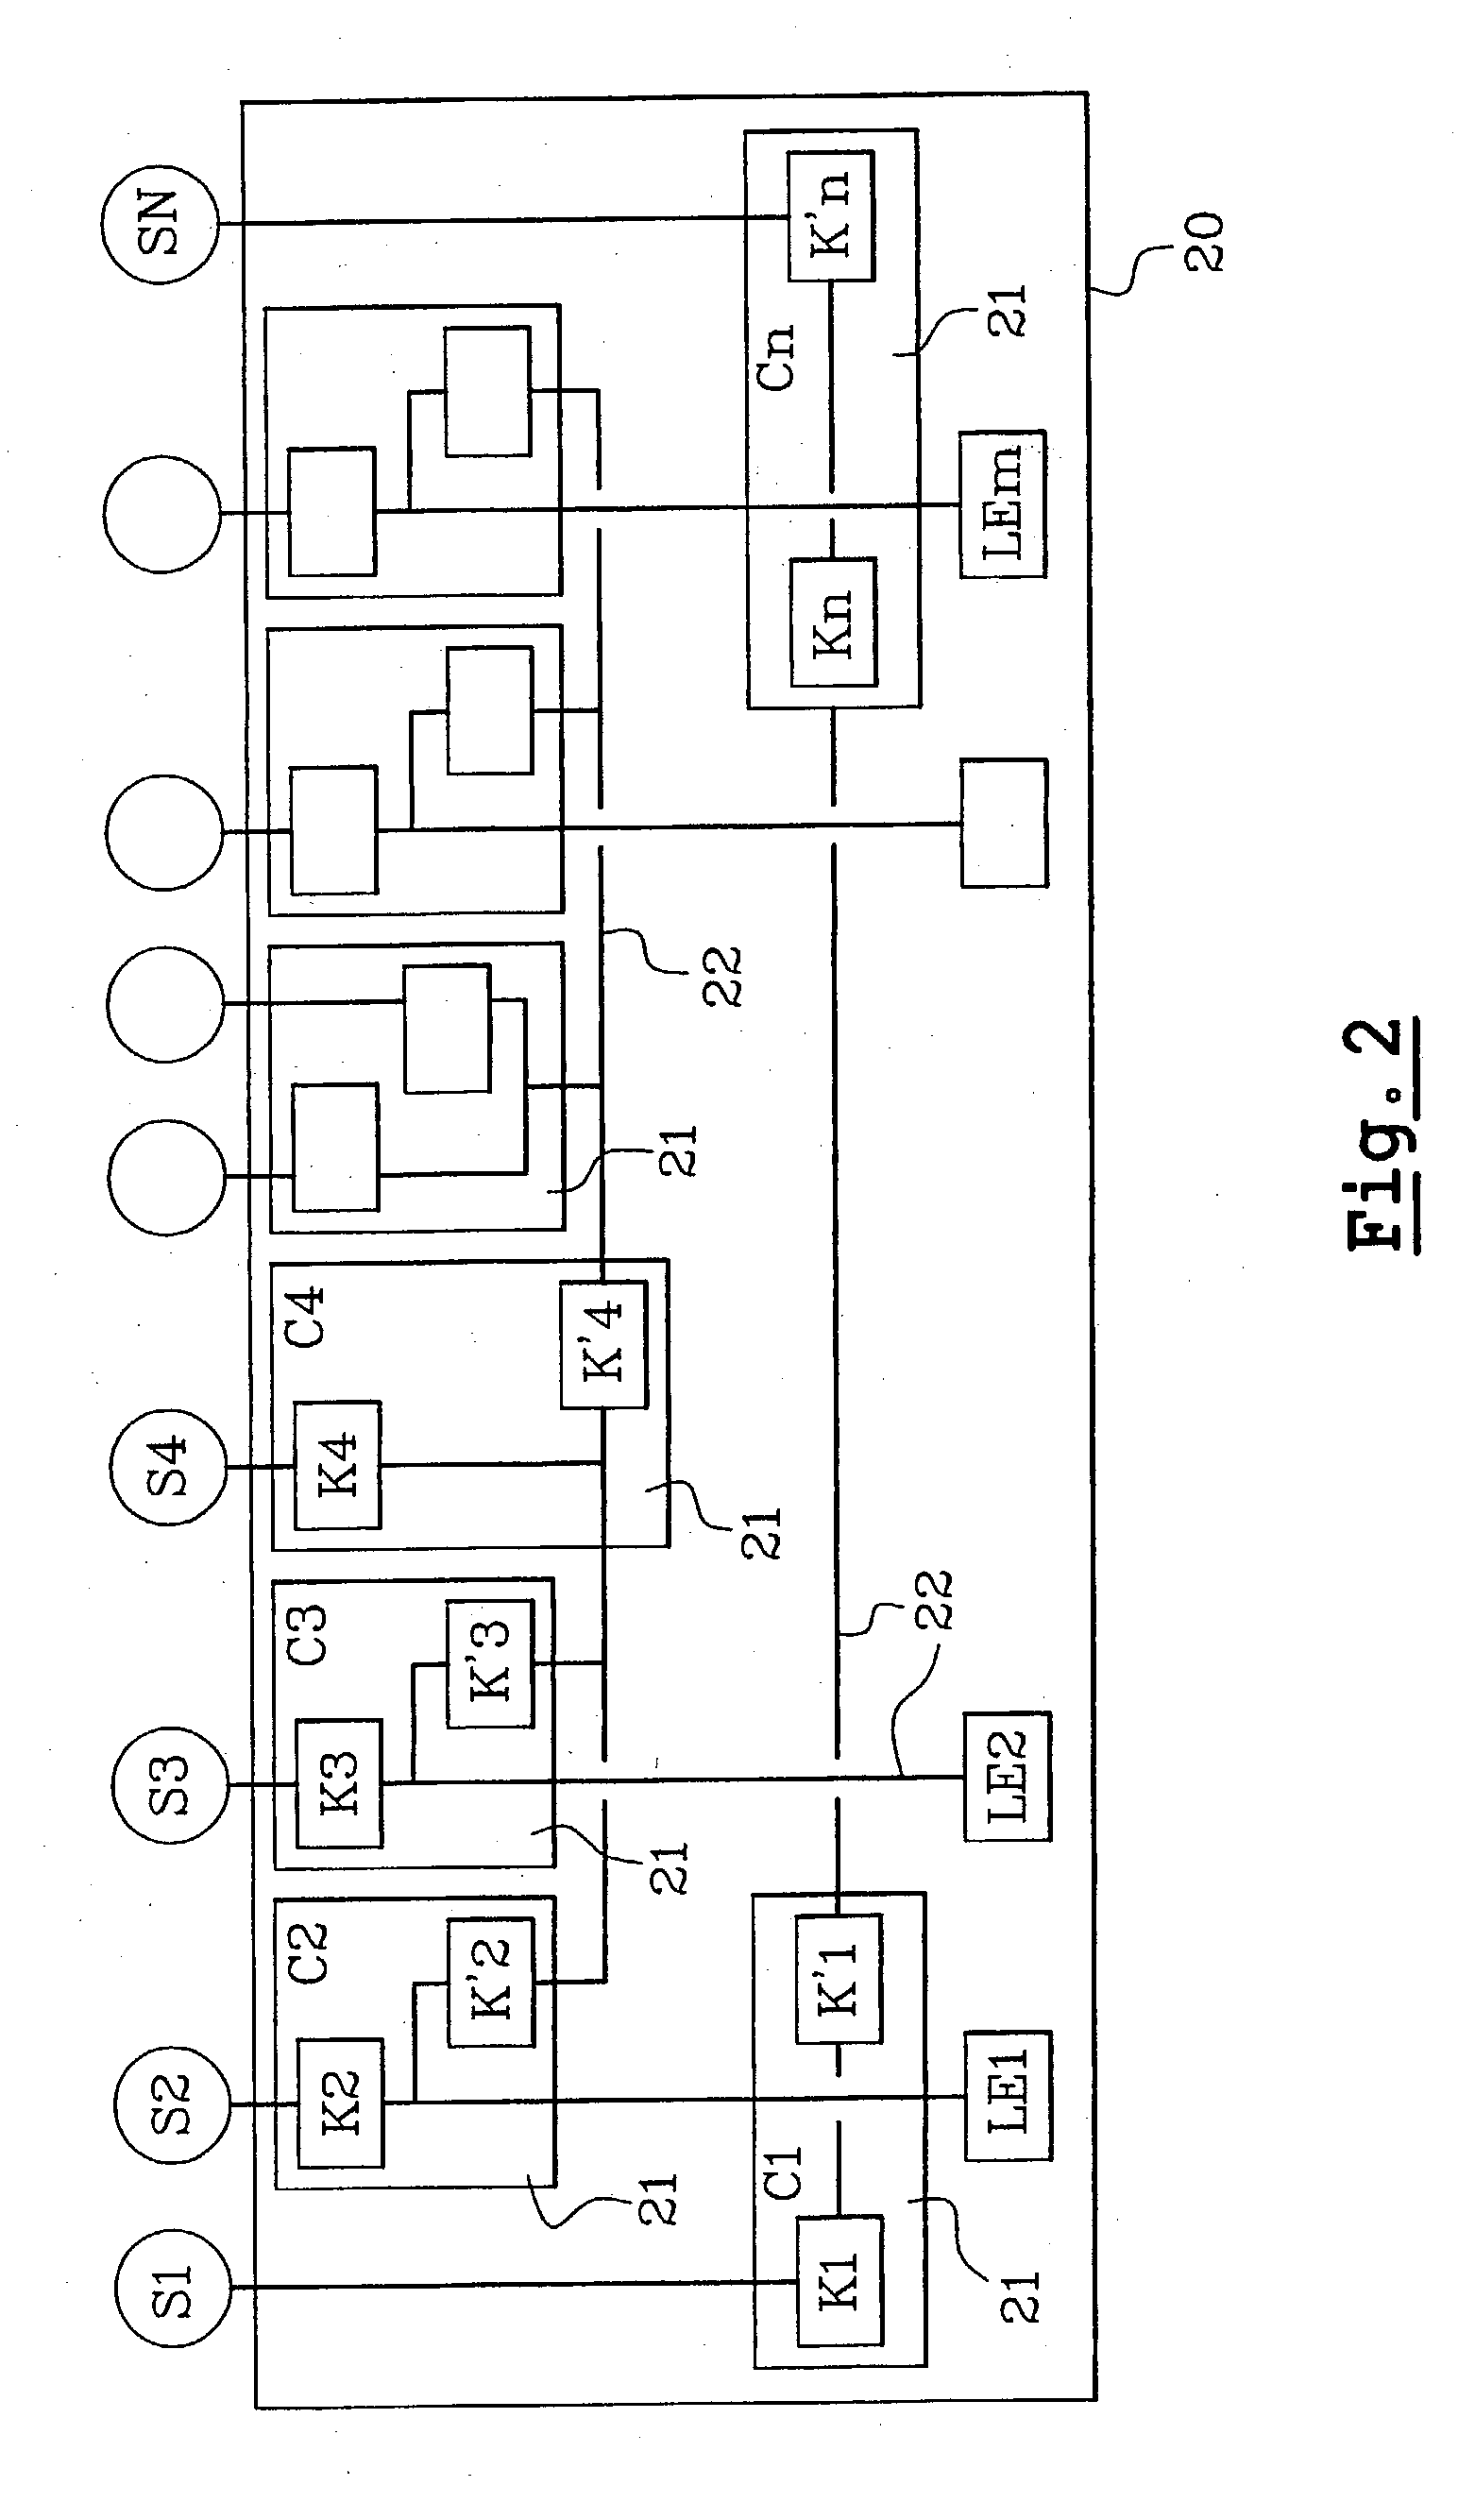 Control system and process for several actuators